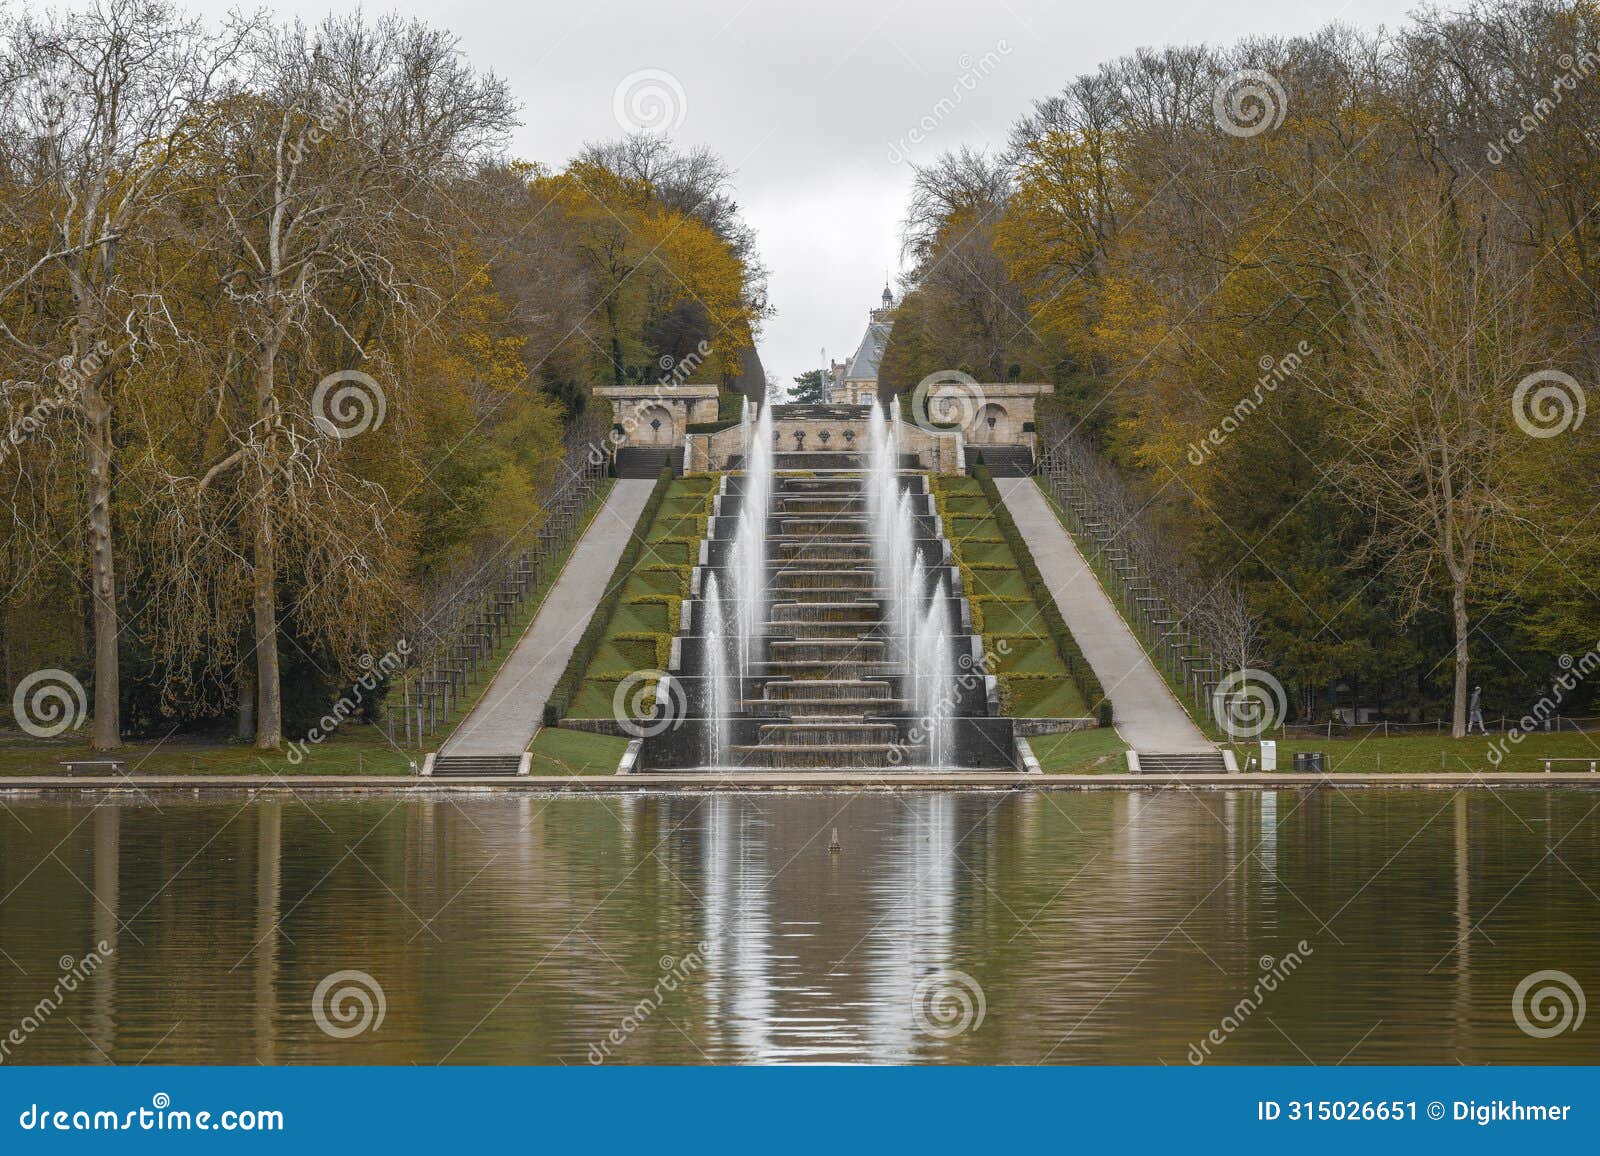 fountain of the 'parc de sceaux' located in the south of paris